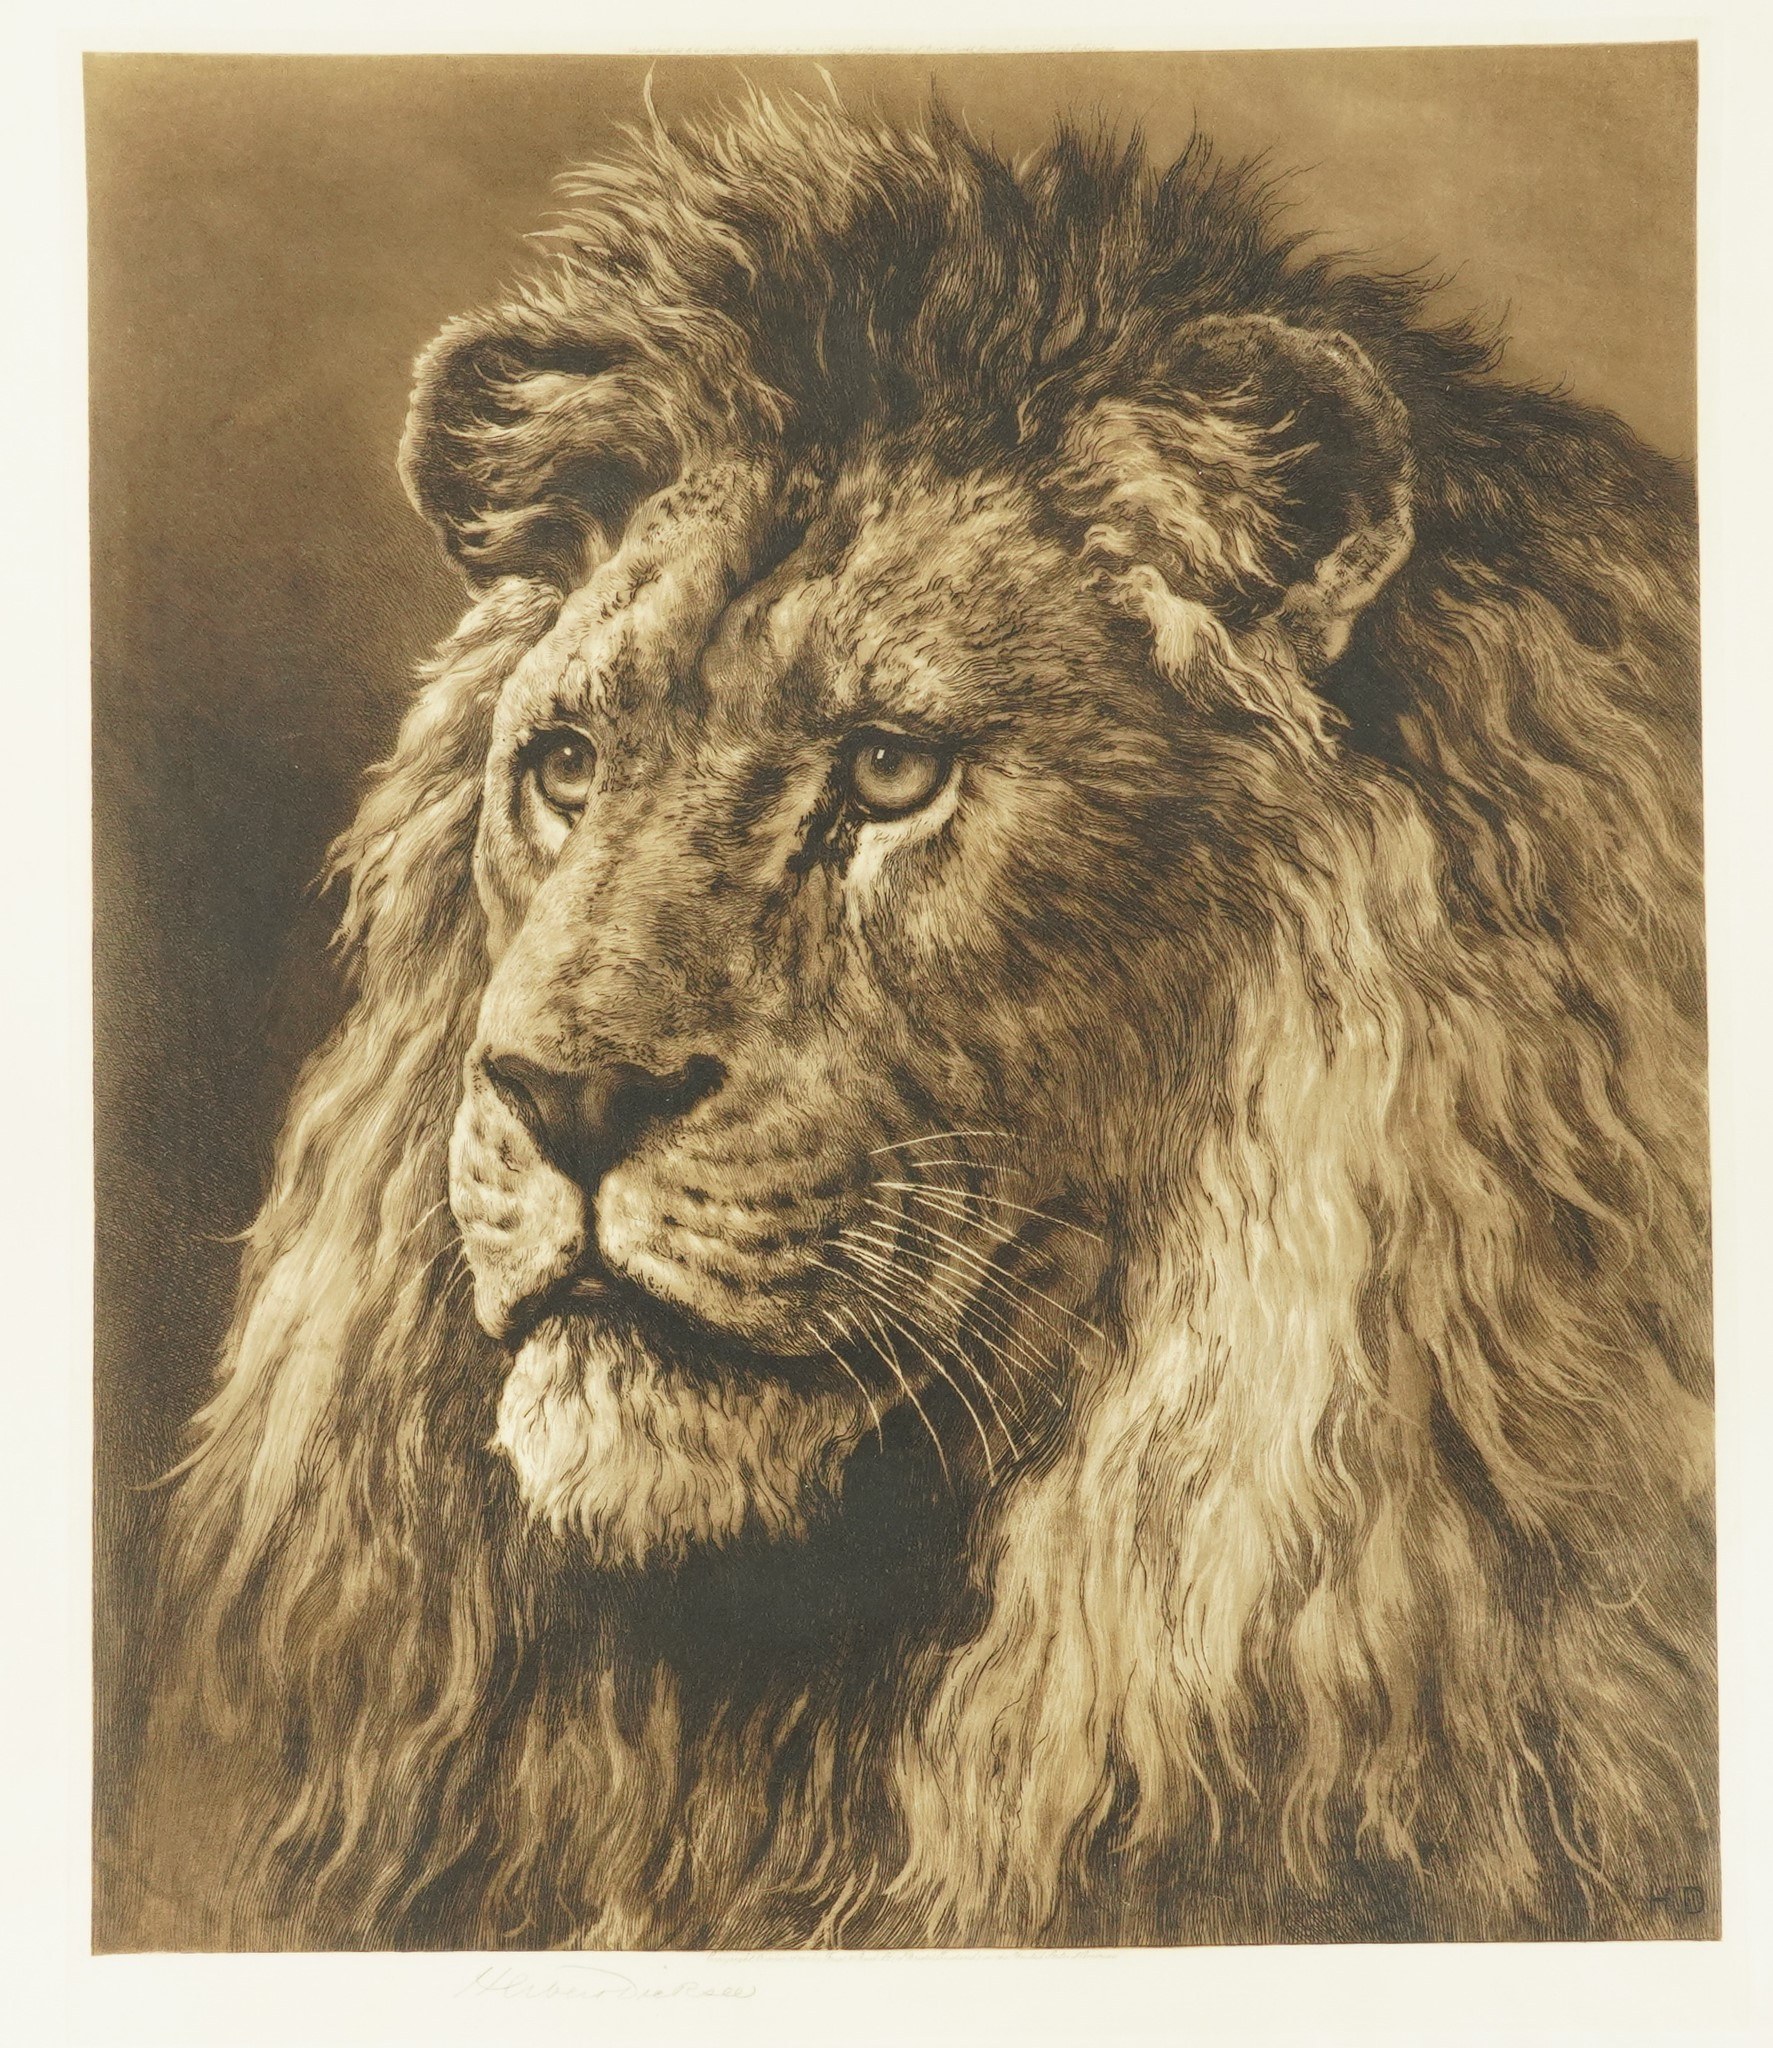 HERBERT DICKSEE (BRITISH, 1862-1942) Head of a Lion (1915) signed 'Herbert Dicksee' (lower left margin), published by Frost & Reed etching 50 x 41.5cm £200-400